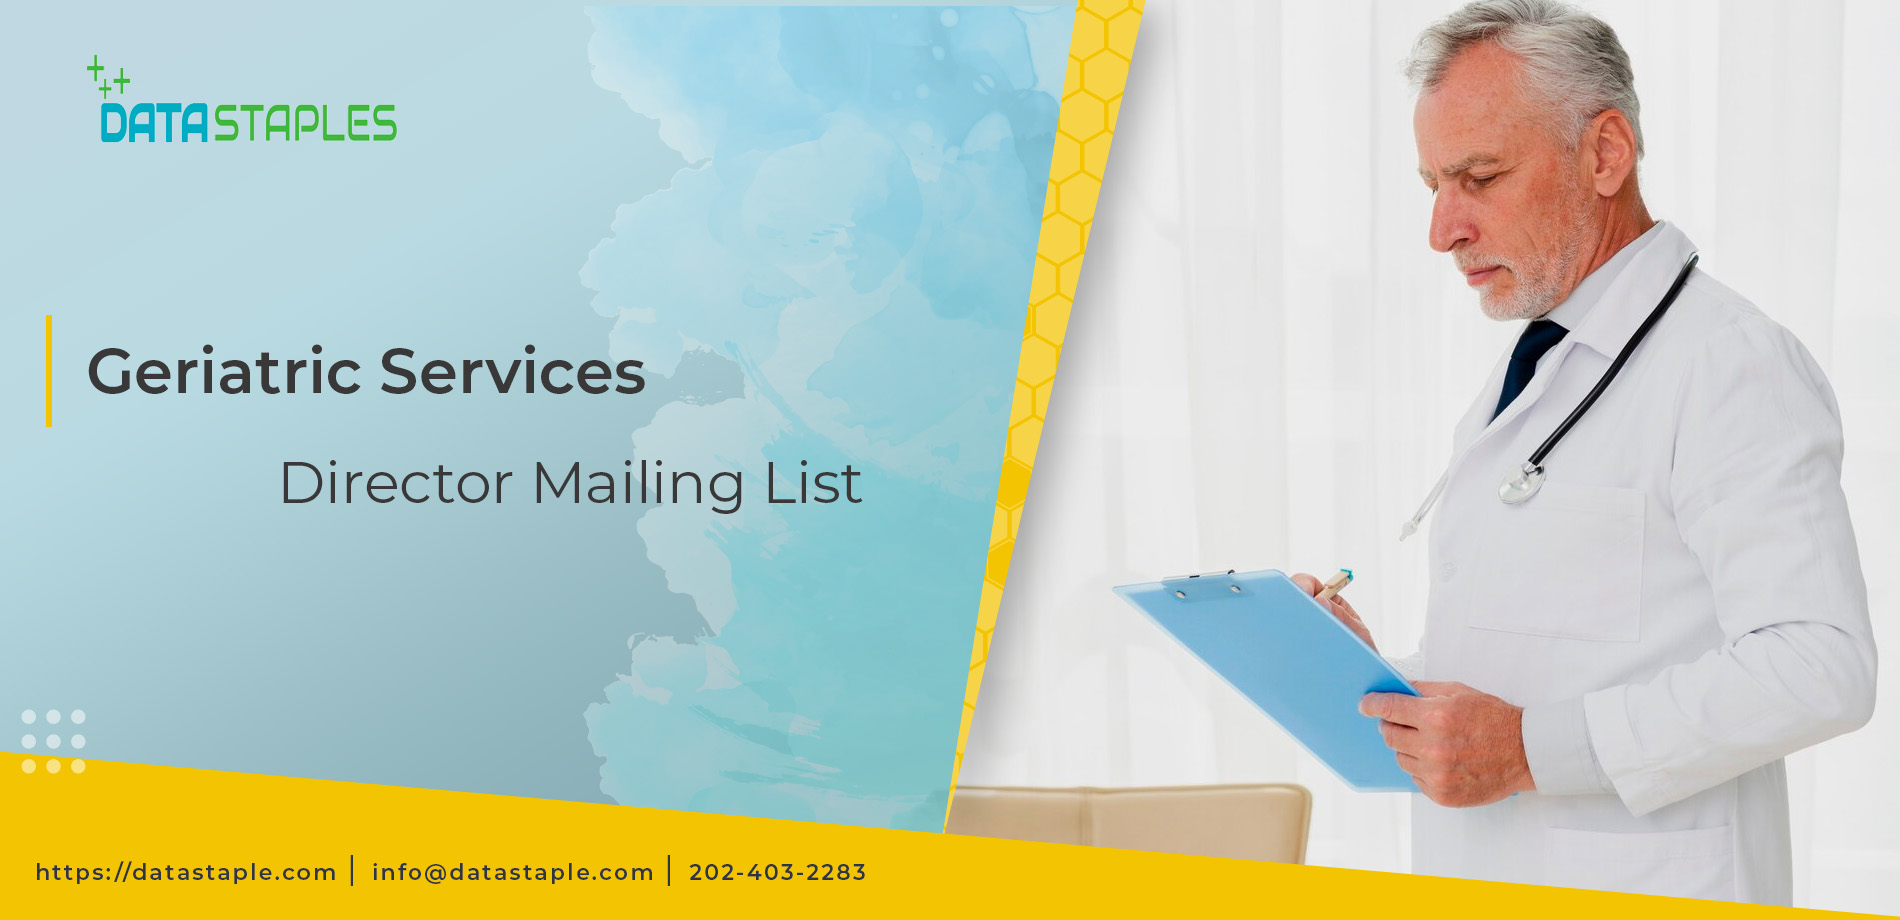 Geriatric Services Director Email List | Geriatric Services Director Mailing List 